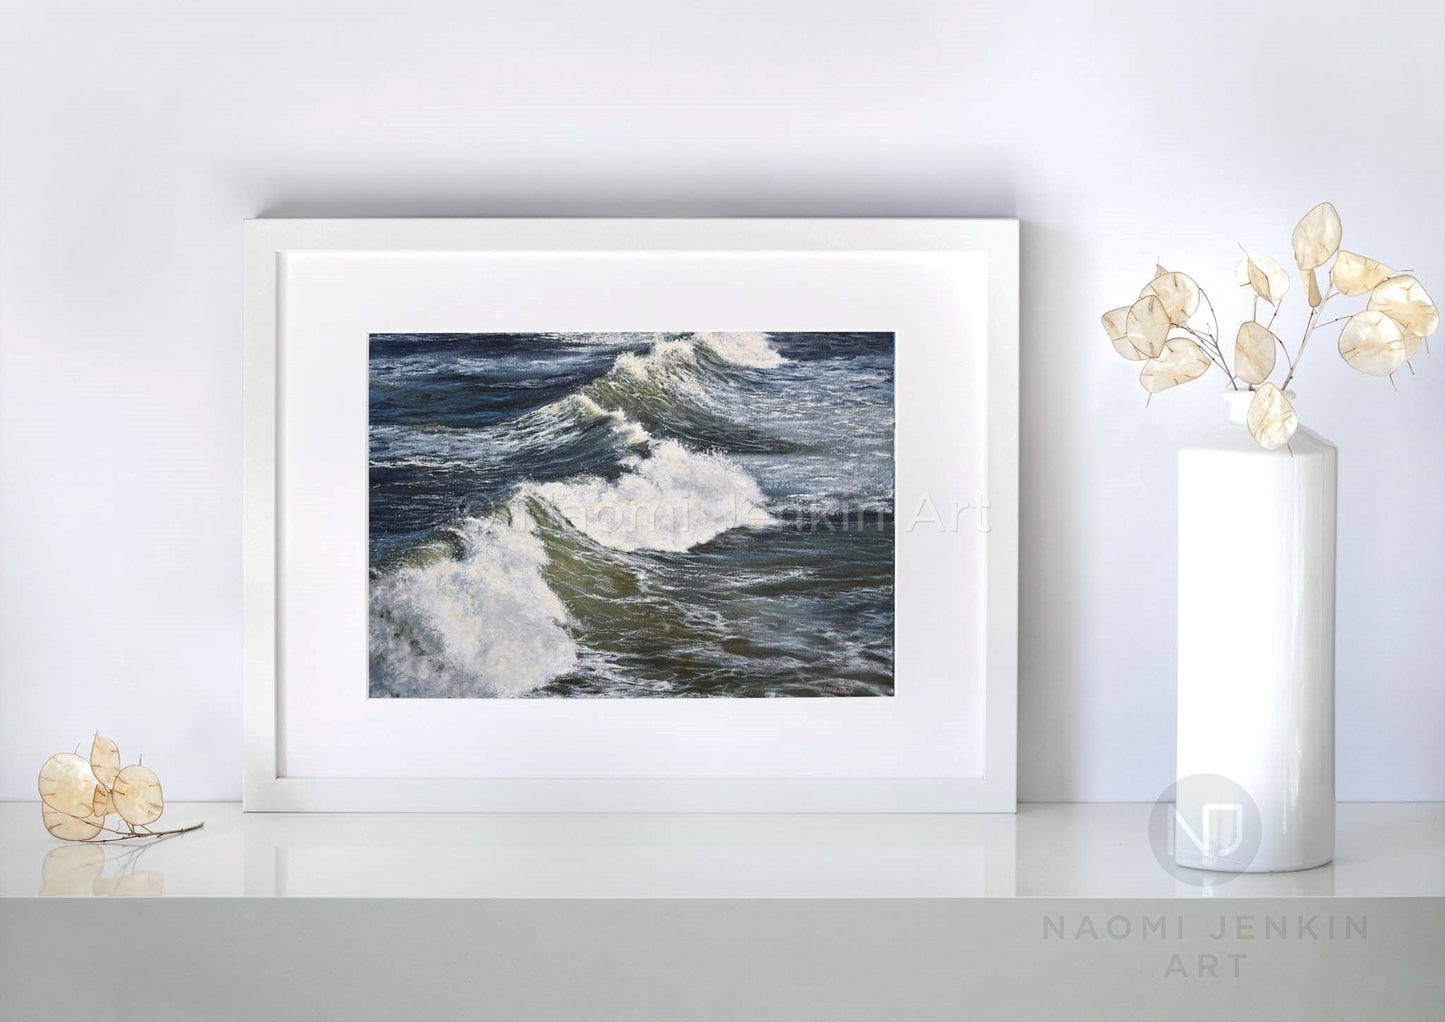 Seascape print 'Winter Swell' by Naomi Jenkin Art in a white frame